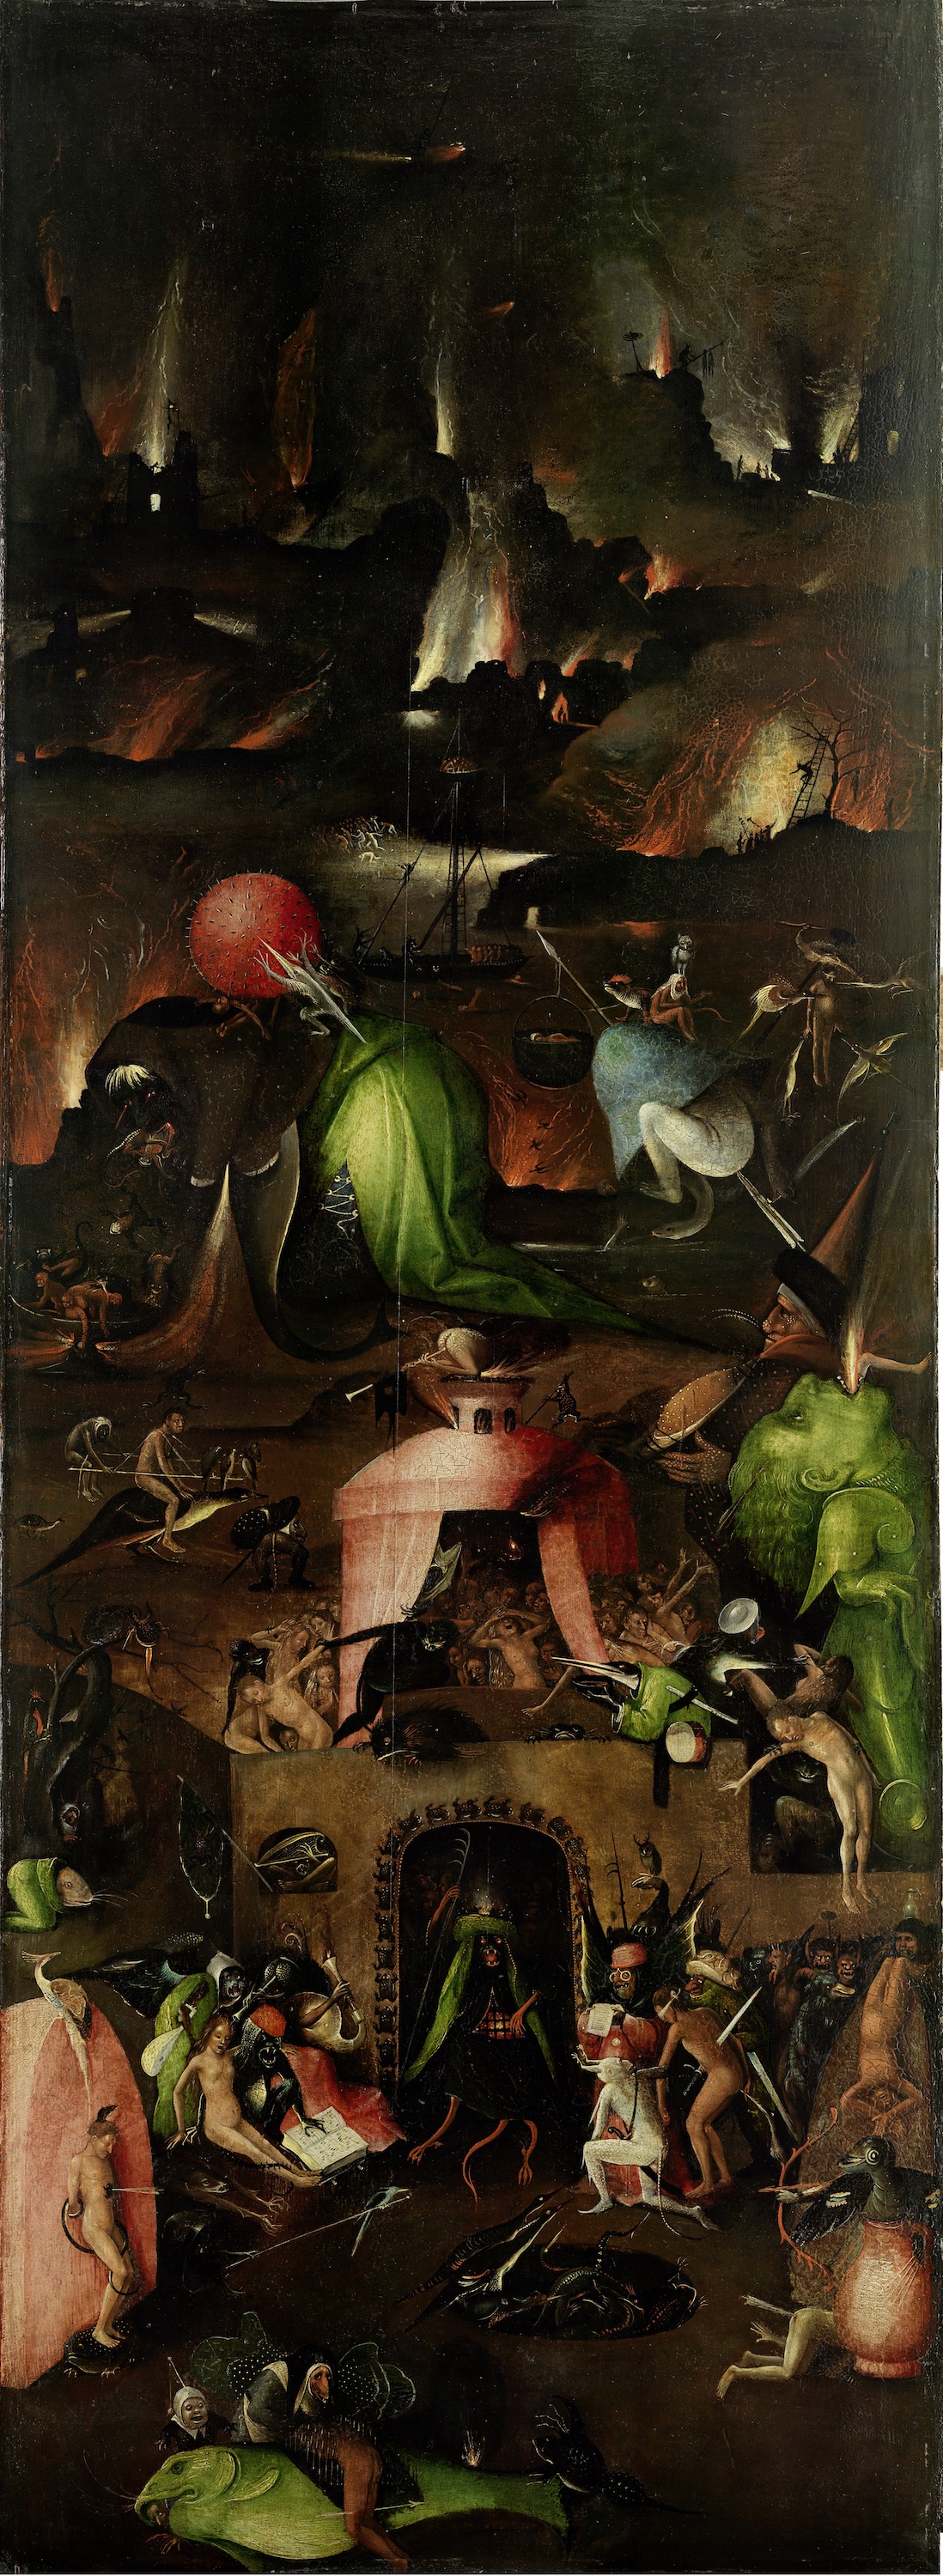 The Last Judgment triptych - the right panel by Hieronymus Bosch - c. 1500 Academy of Fine Arts, Vienna